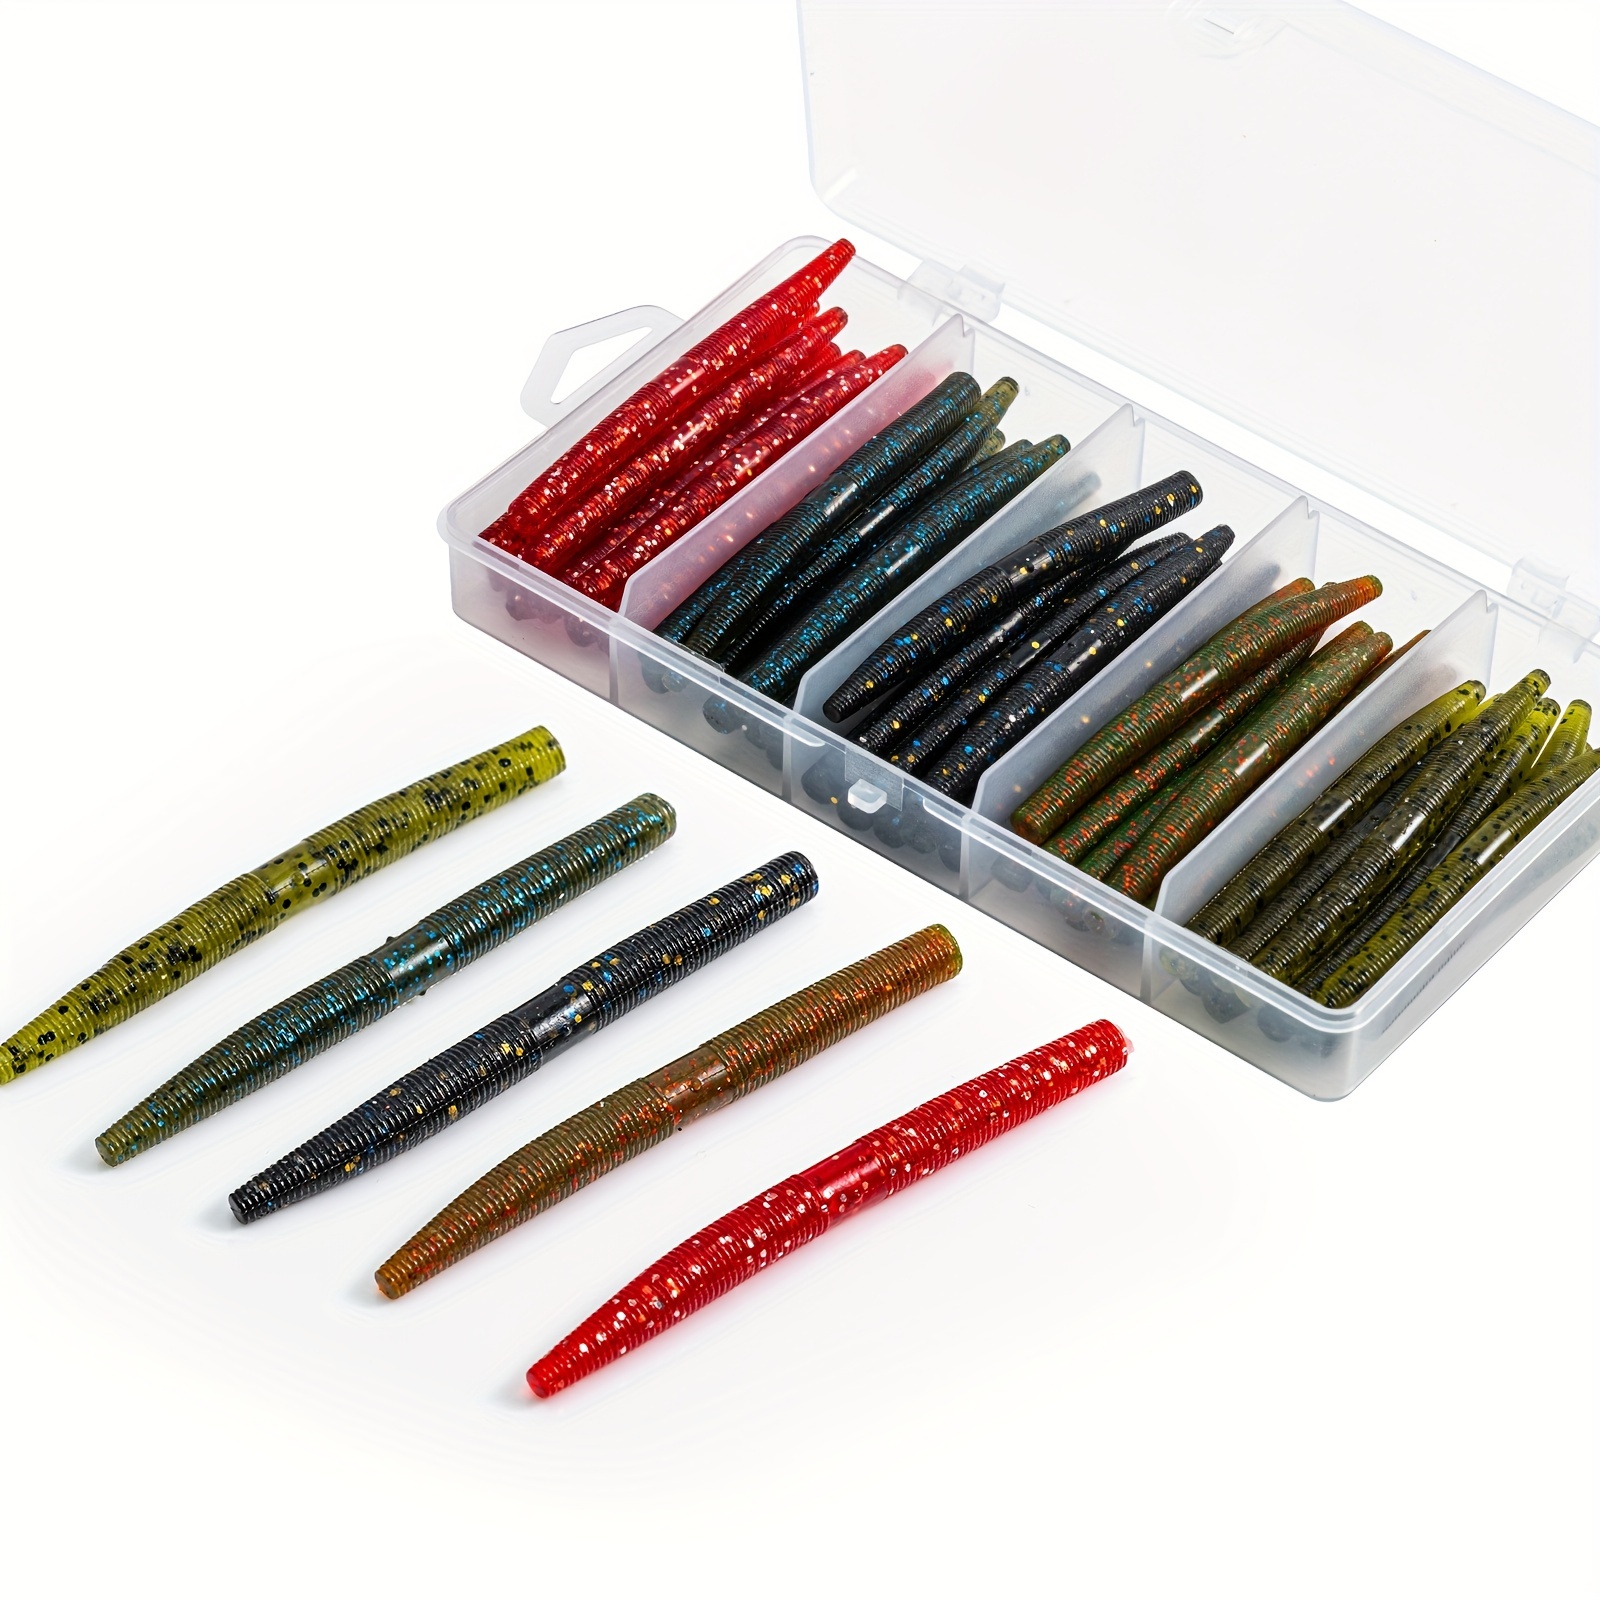 50pcs Senko Worms Fishing Lures Kit, Wacky Worm Soft Plastic Bait For  Freshwater Saltwater Bass Trout, 3 4